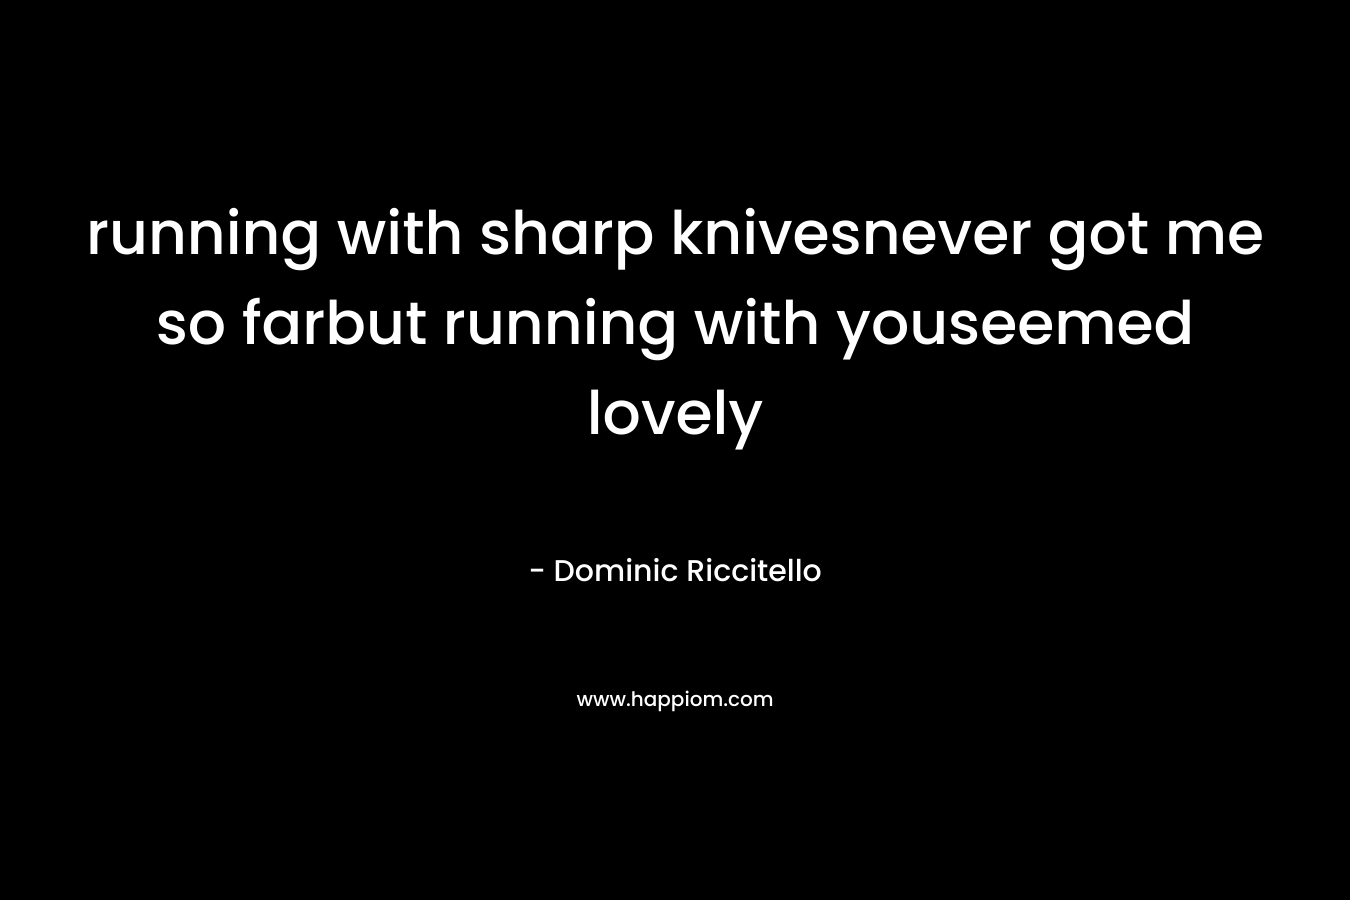 running with sharp knivesnever got me so farbut running with youseemed lovely – Dominic Riccitello